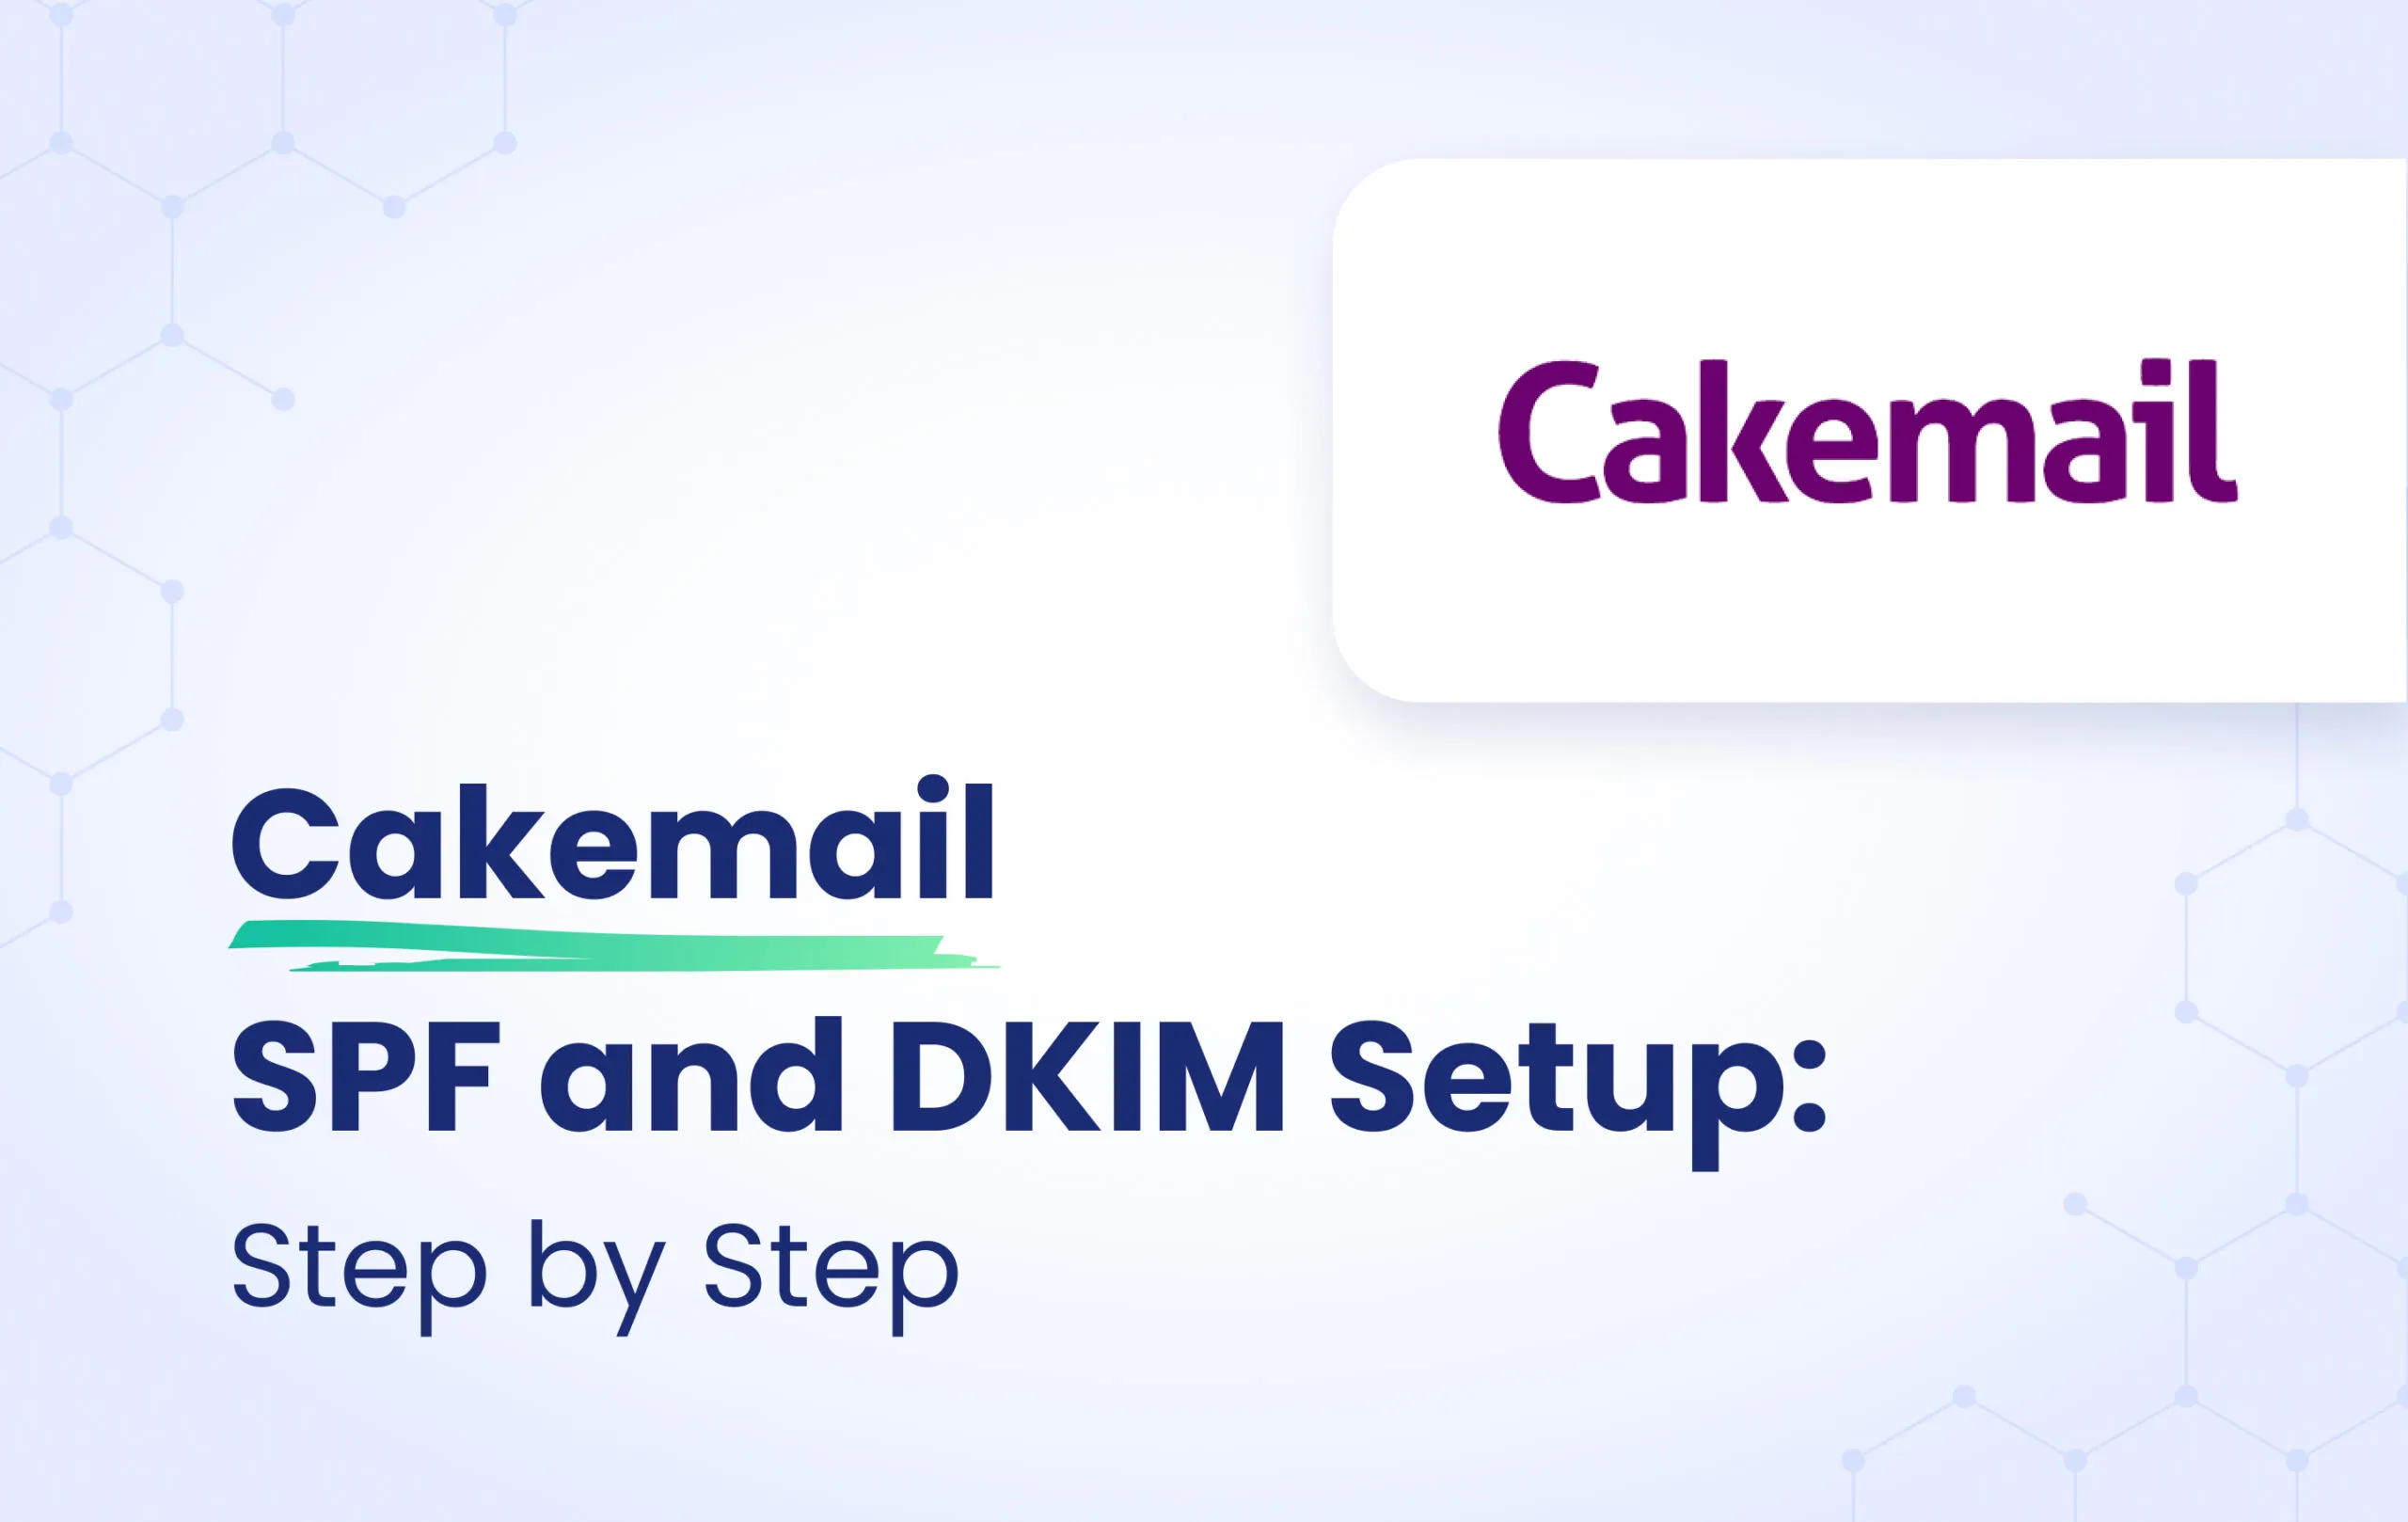 Configuration of SPF and DKIM for Cakemail